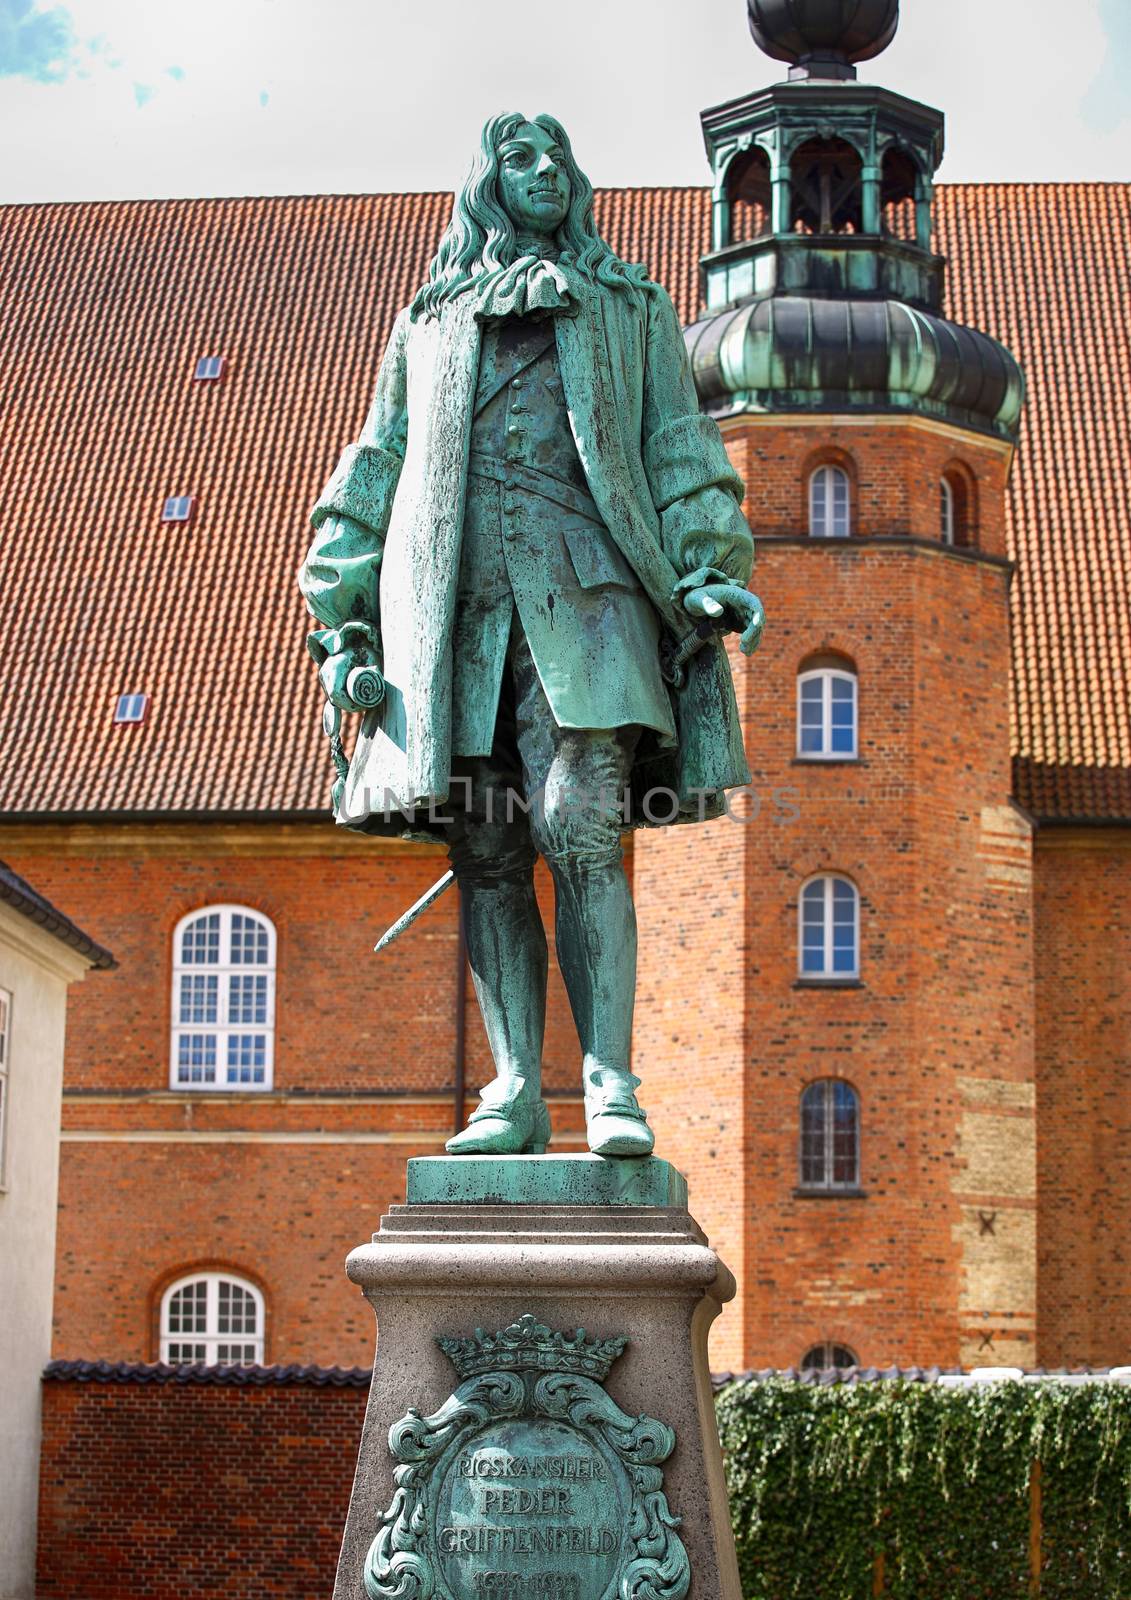 The statue of Chancellor Peder Griffenfeld and a tower in Copenh by vladacanon